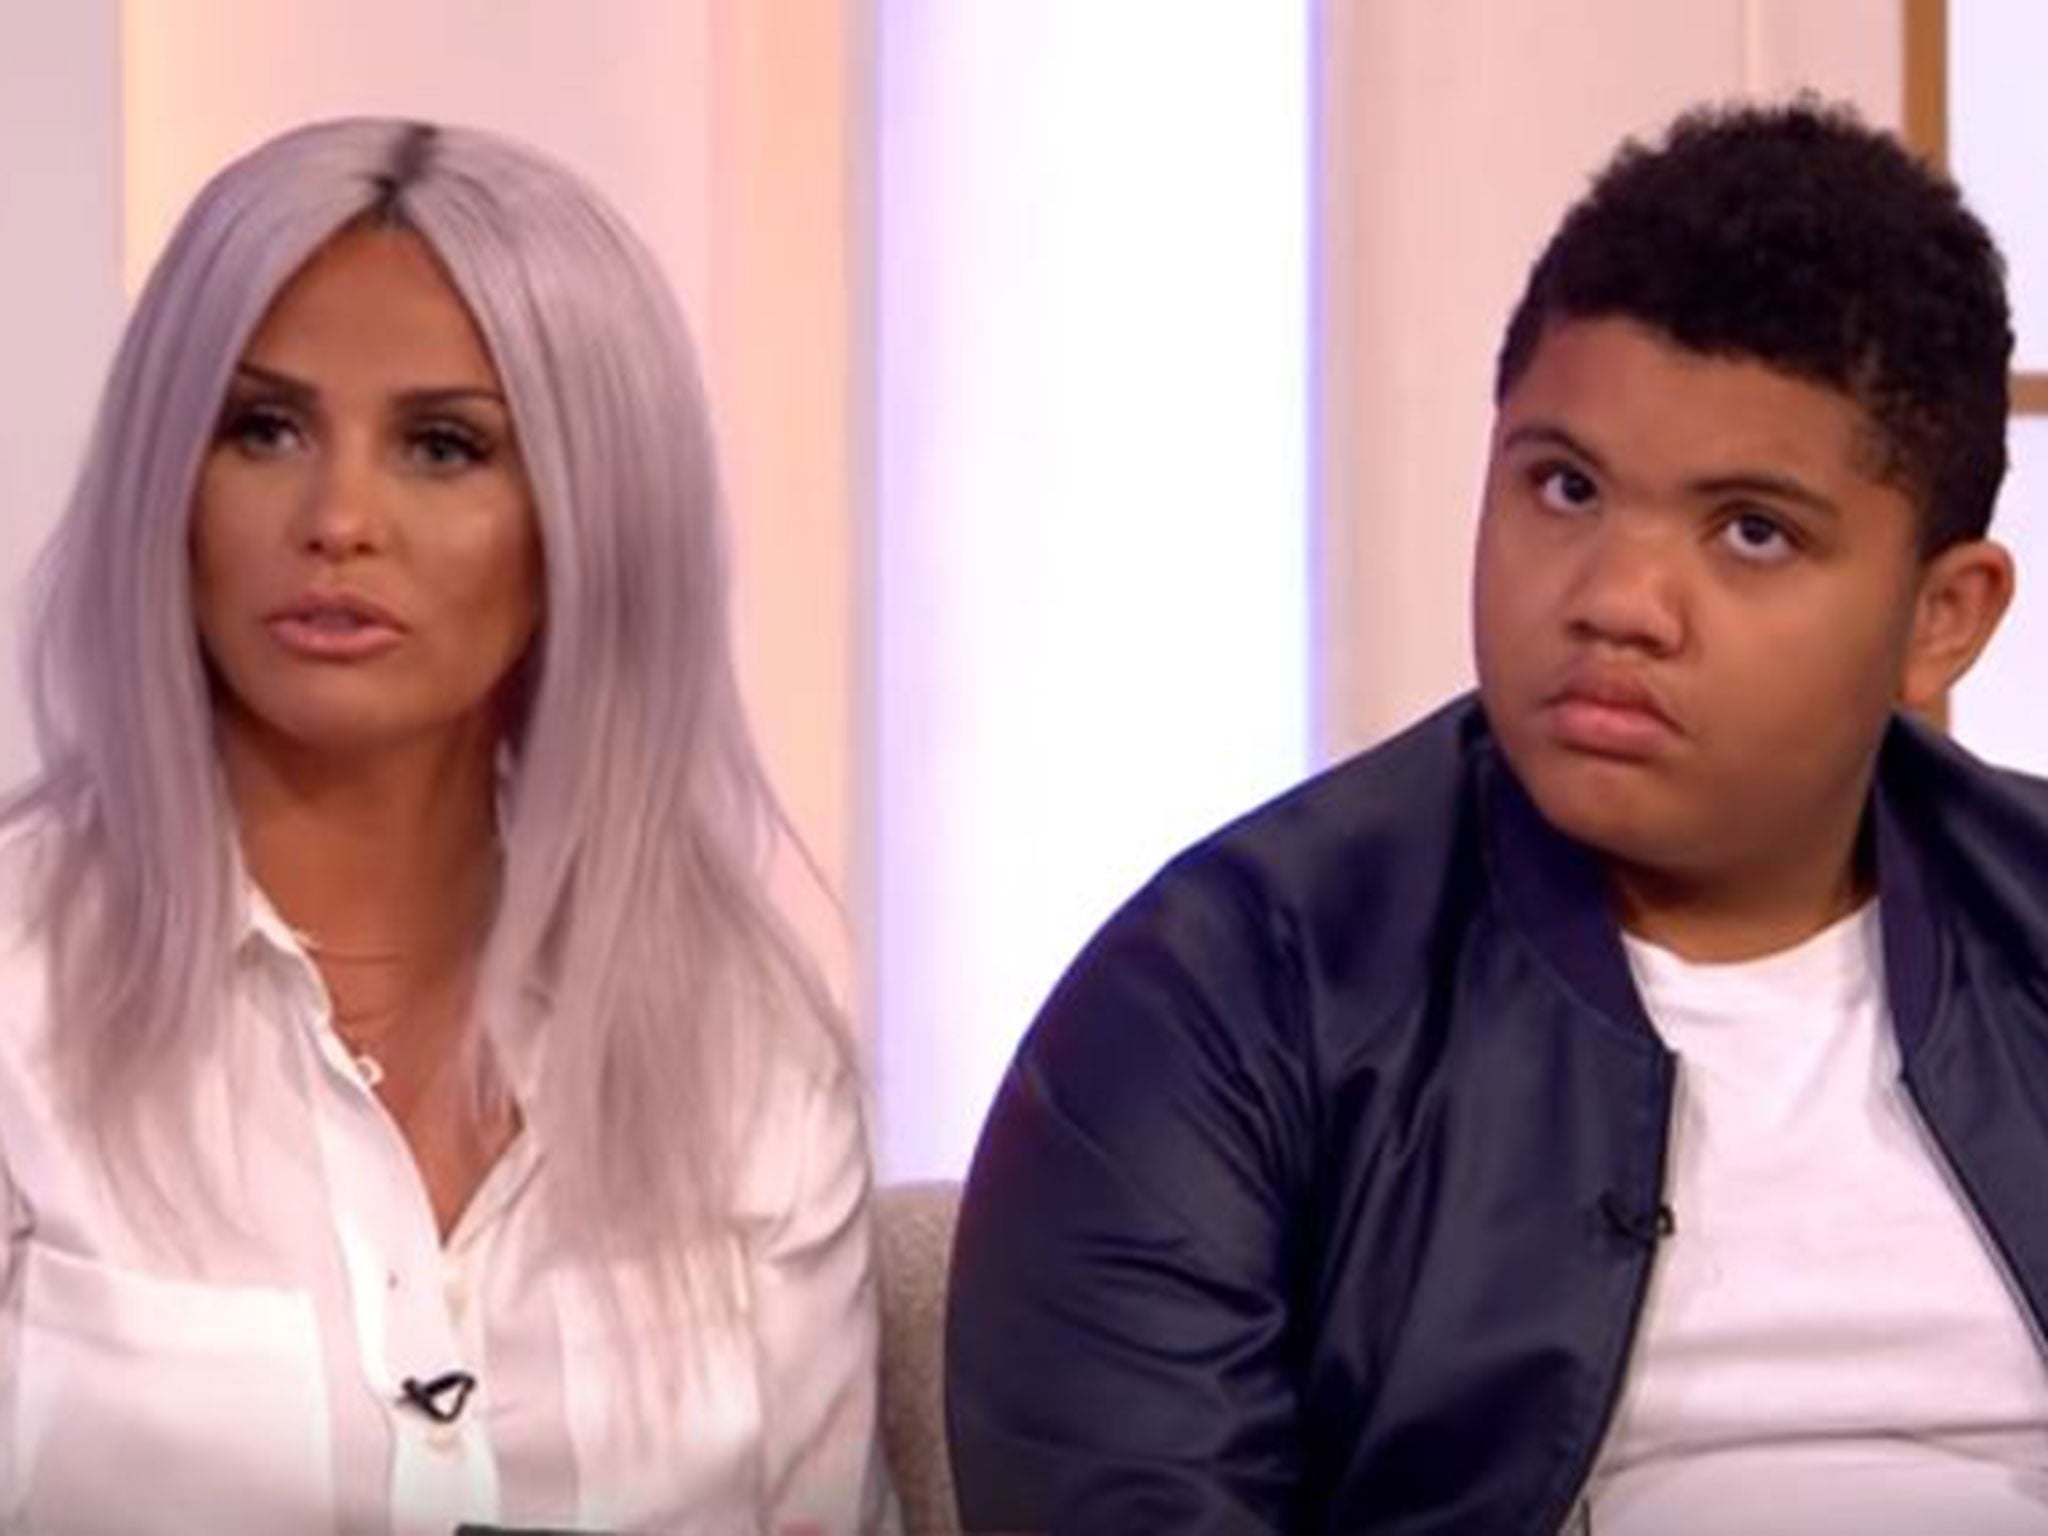 Katie Price brought Harvey on to the programme as part of a discussion about internet trolls